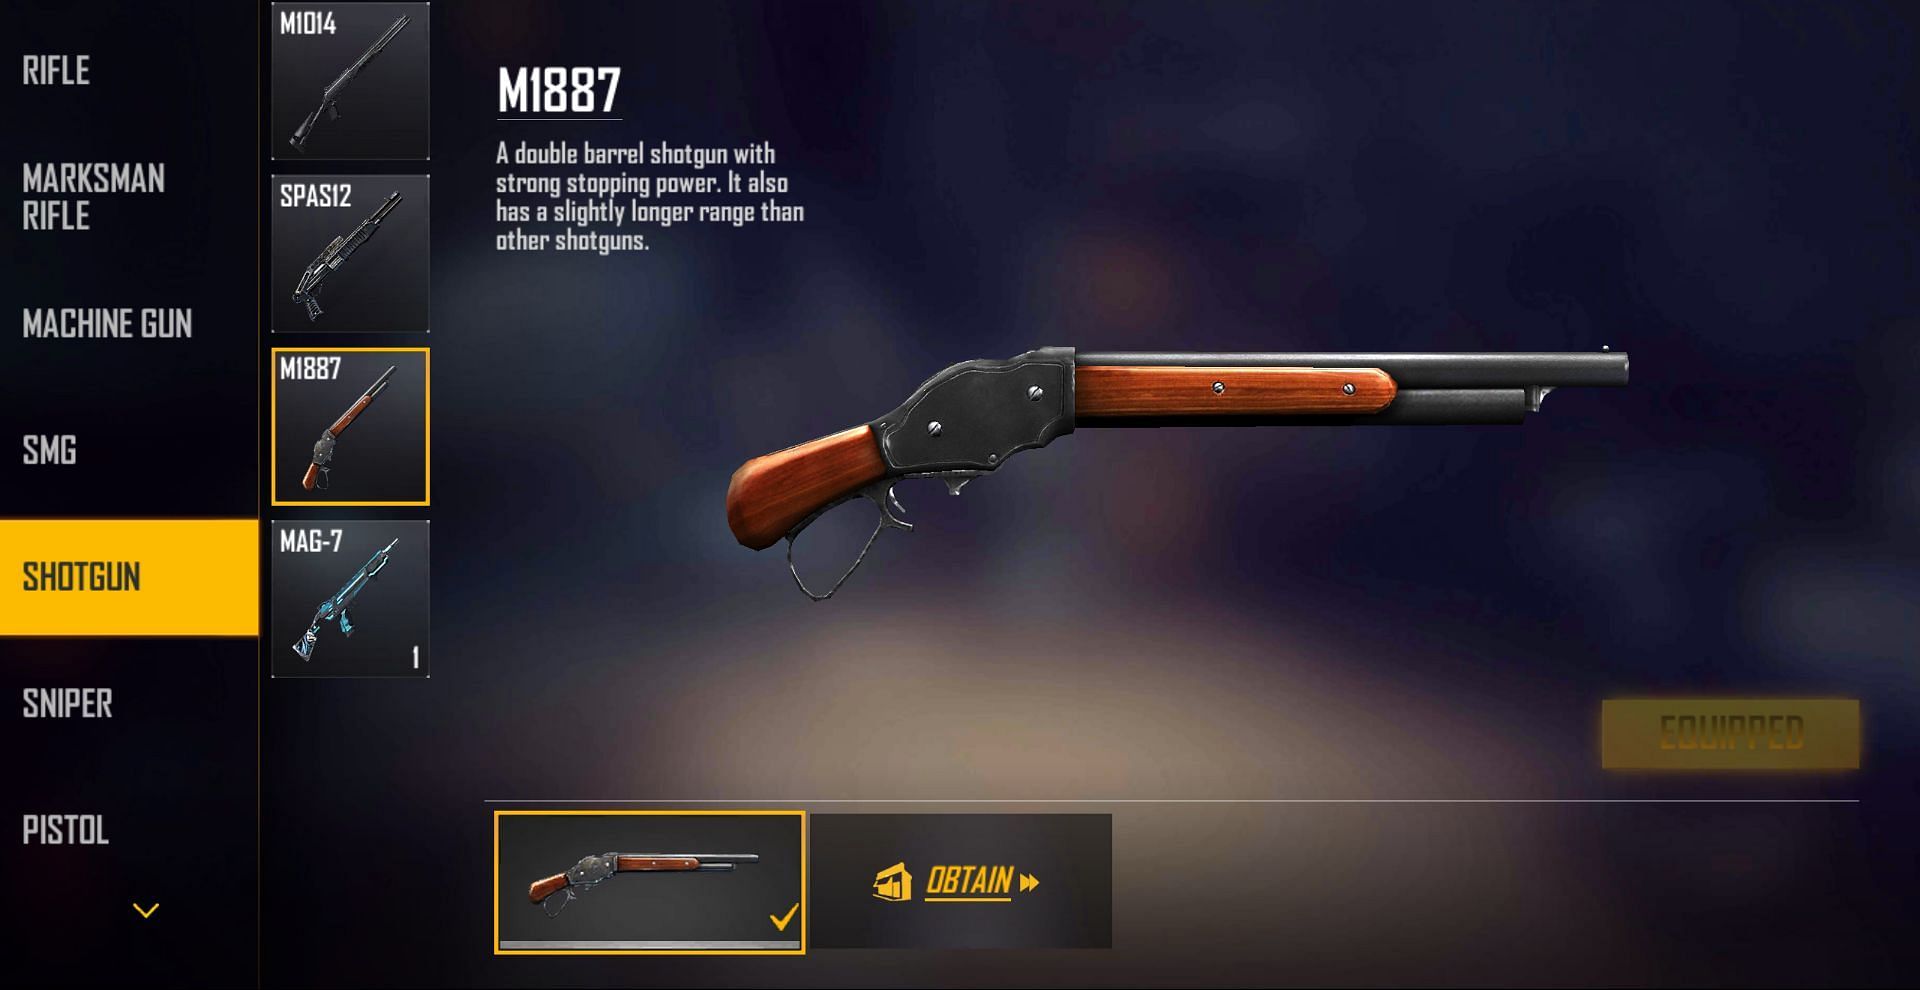 The M1887 can deal heavy damage in Free Fire (Image via Free Fire)